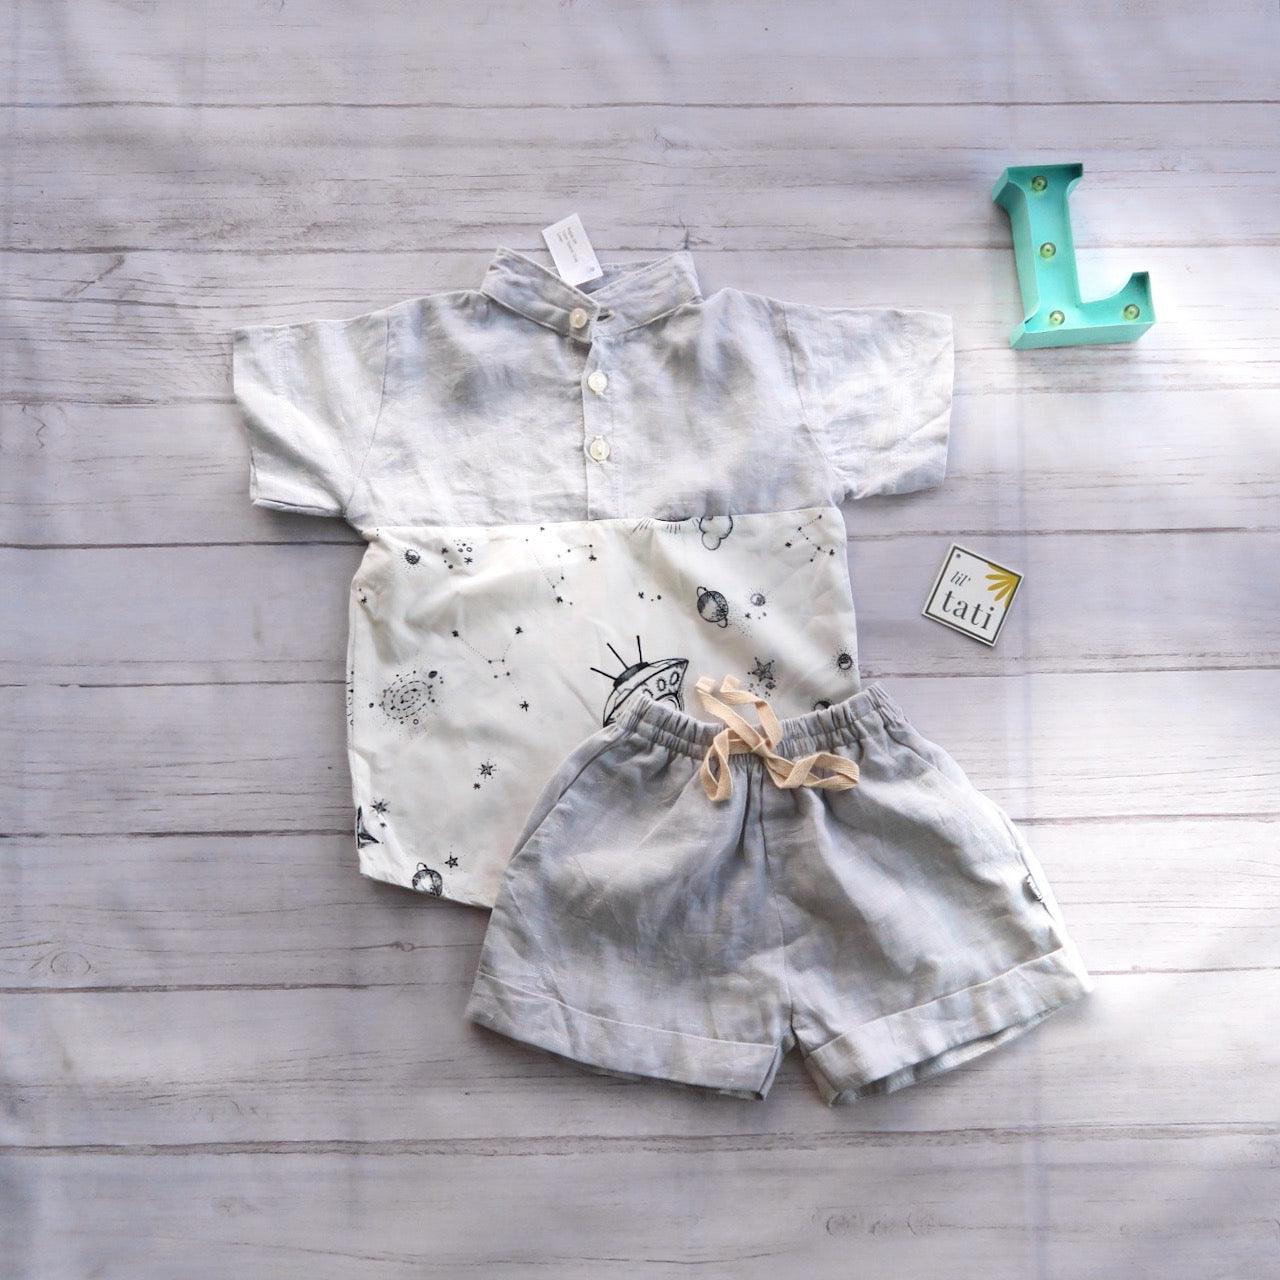 Maple Top & Shorts in Space White and Light Gray Linen - Lil' Tati